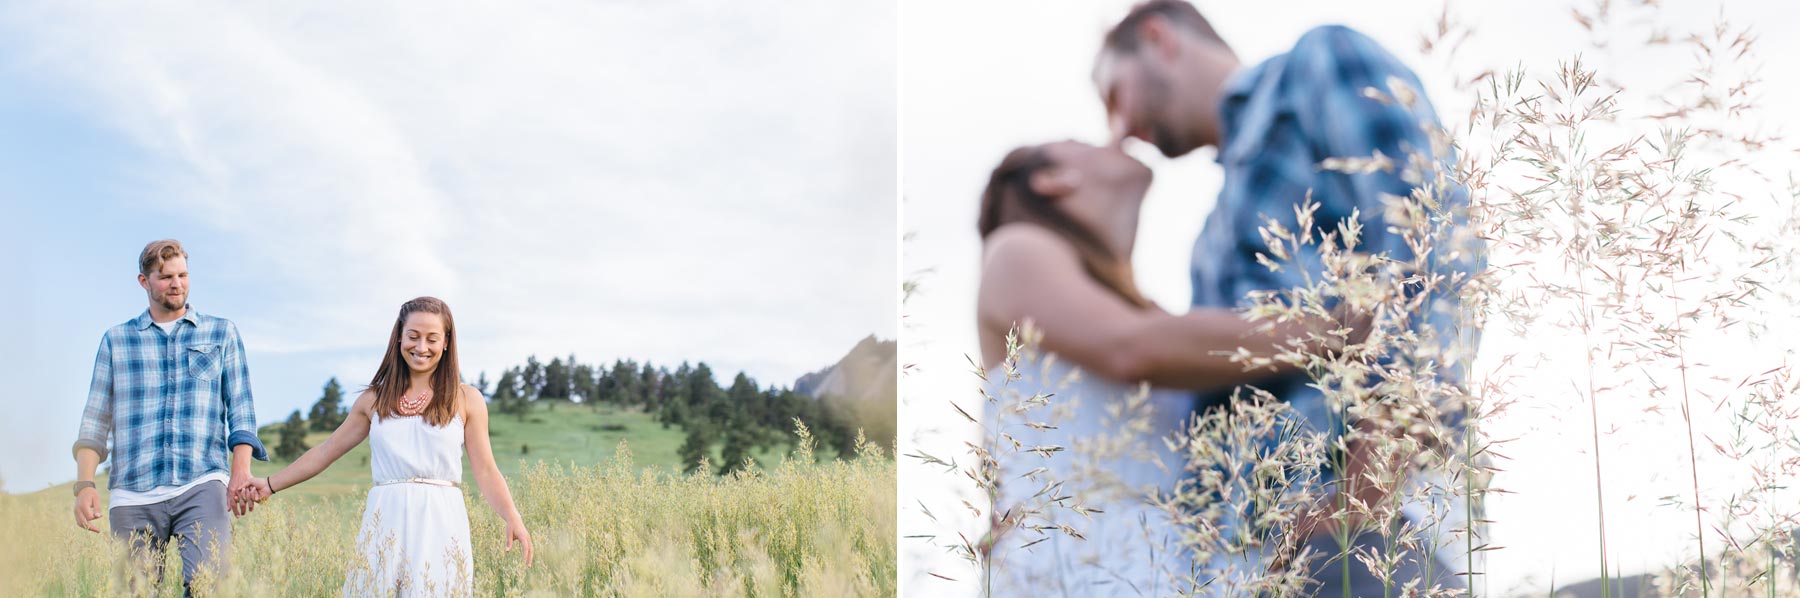 Irving-Photography-Clay-Jessica-Boulder-Engagement-002